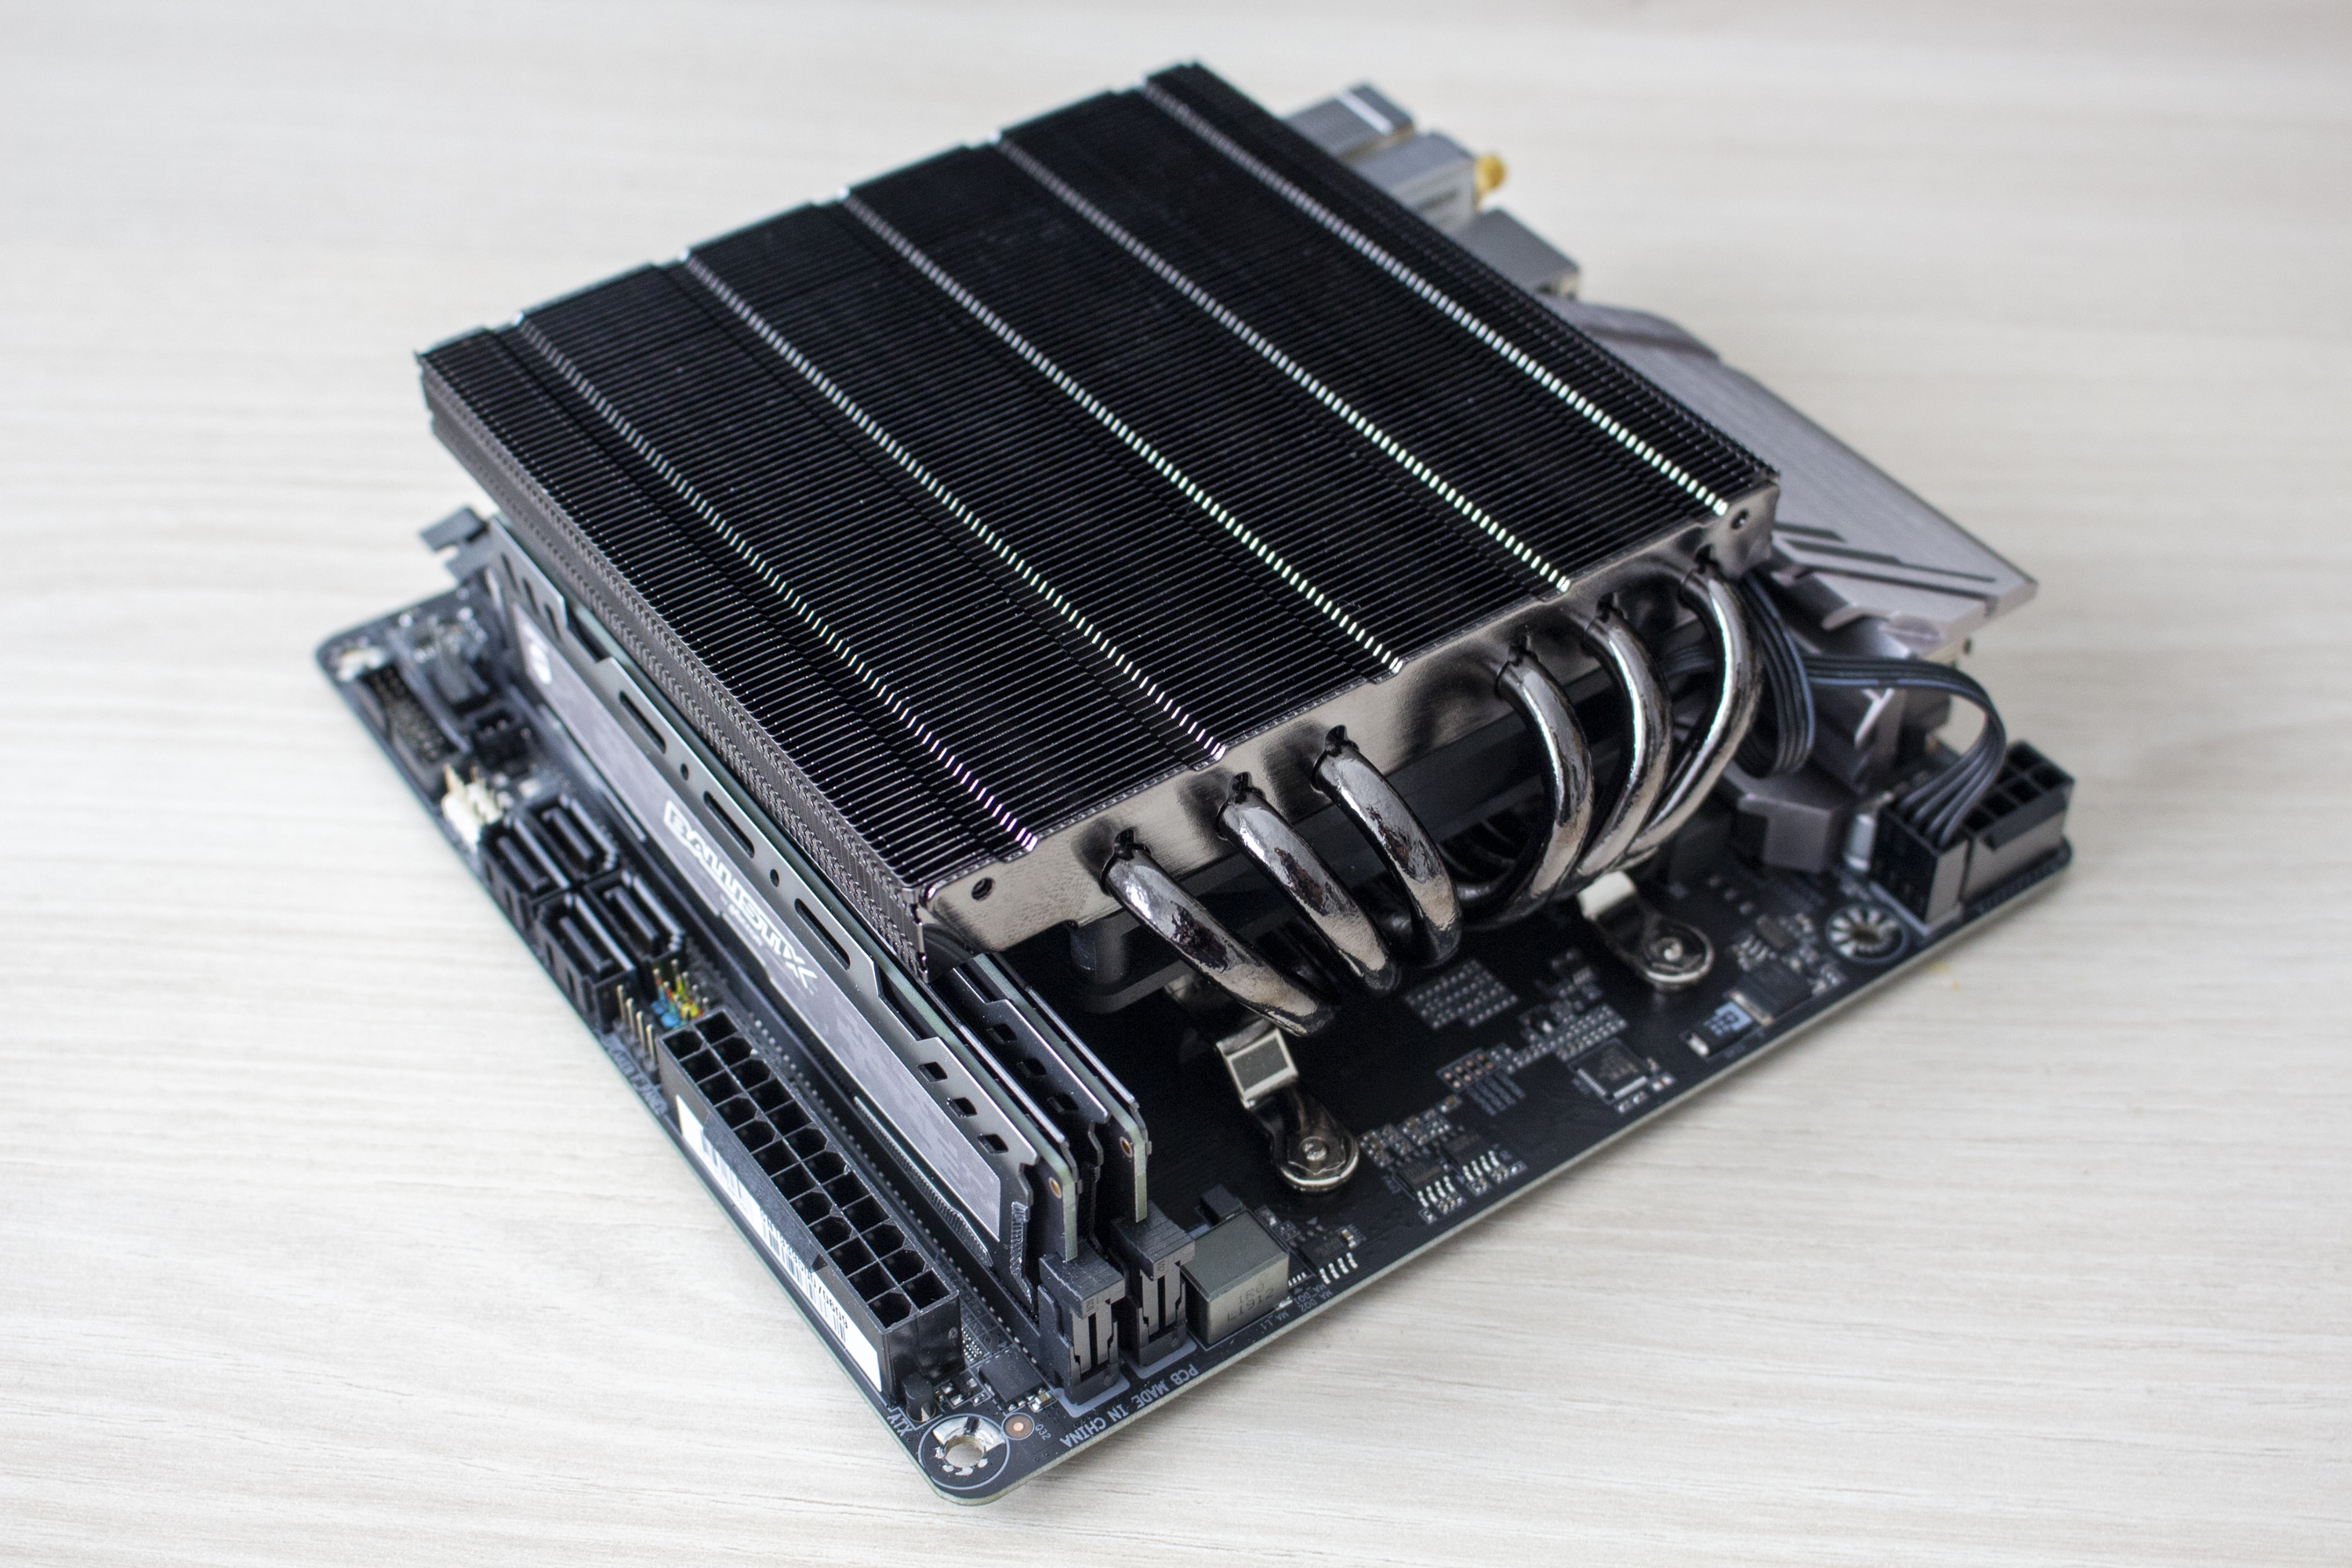 Alpenföhn Black Ridge - CPU cooler for ITX systems with performance option